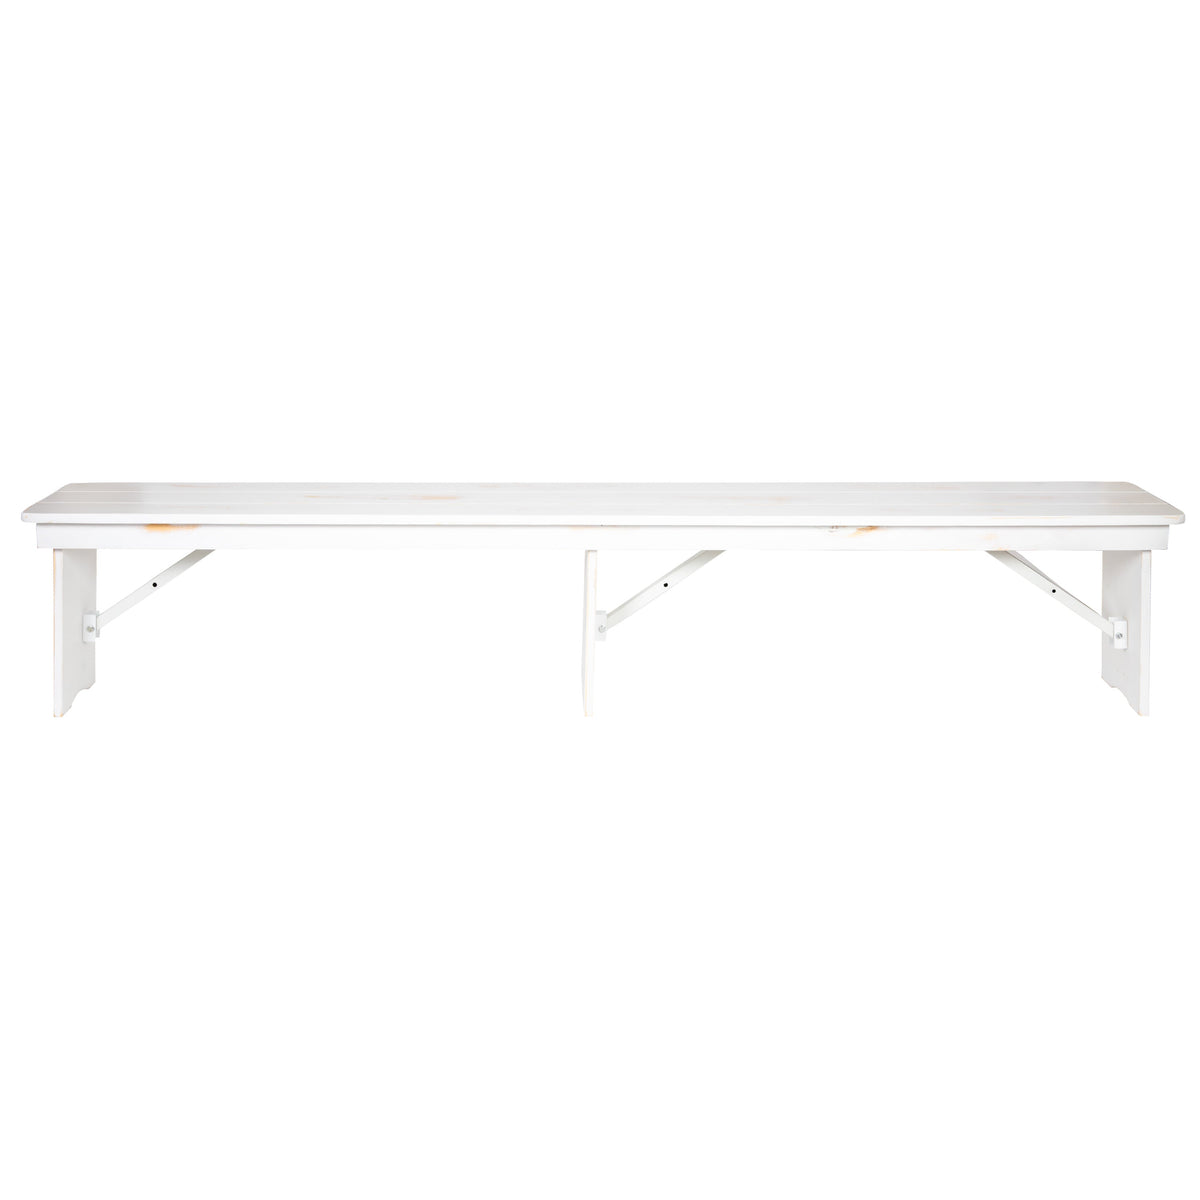 Antique Rustic White |#| 8' x 12inch Antique Rustic White Solid Pine Folding Farm Bench - Portable Bench